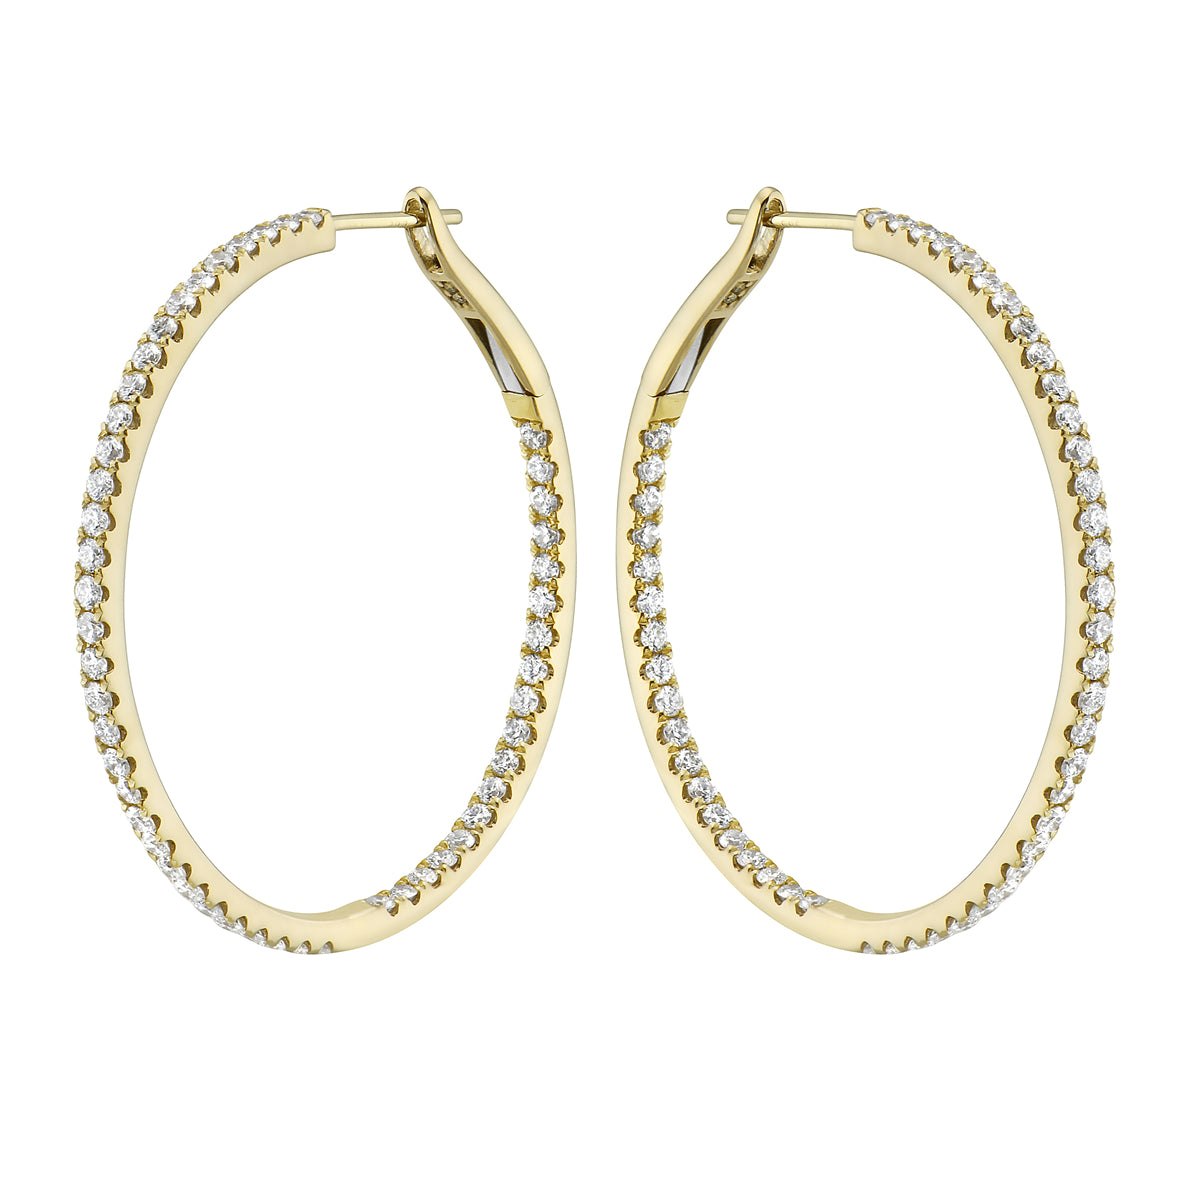 1.5in Yellow Gold Insdie and Out Diamond Hoop Earrings